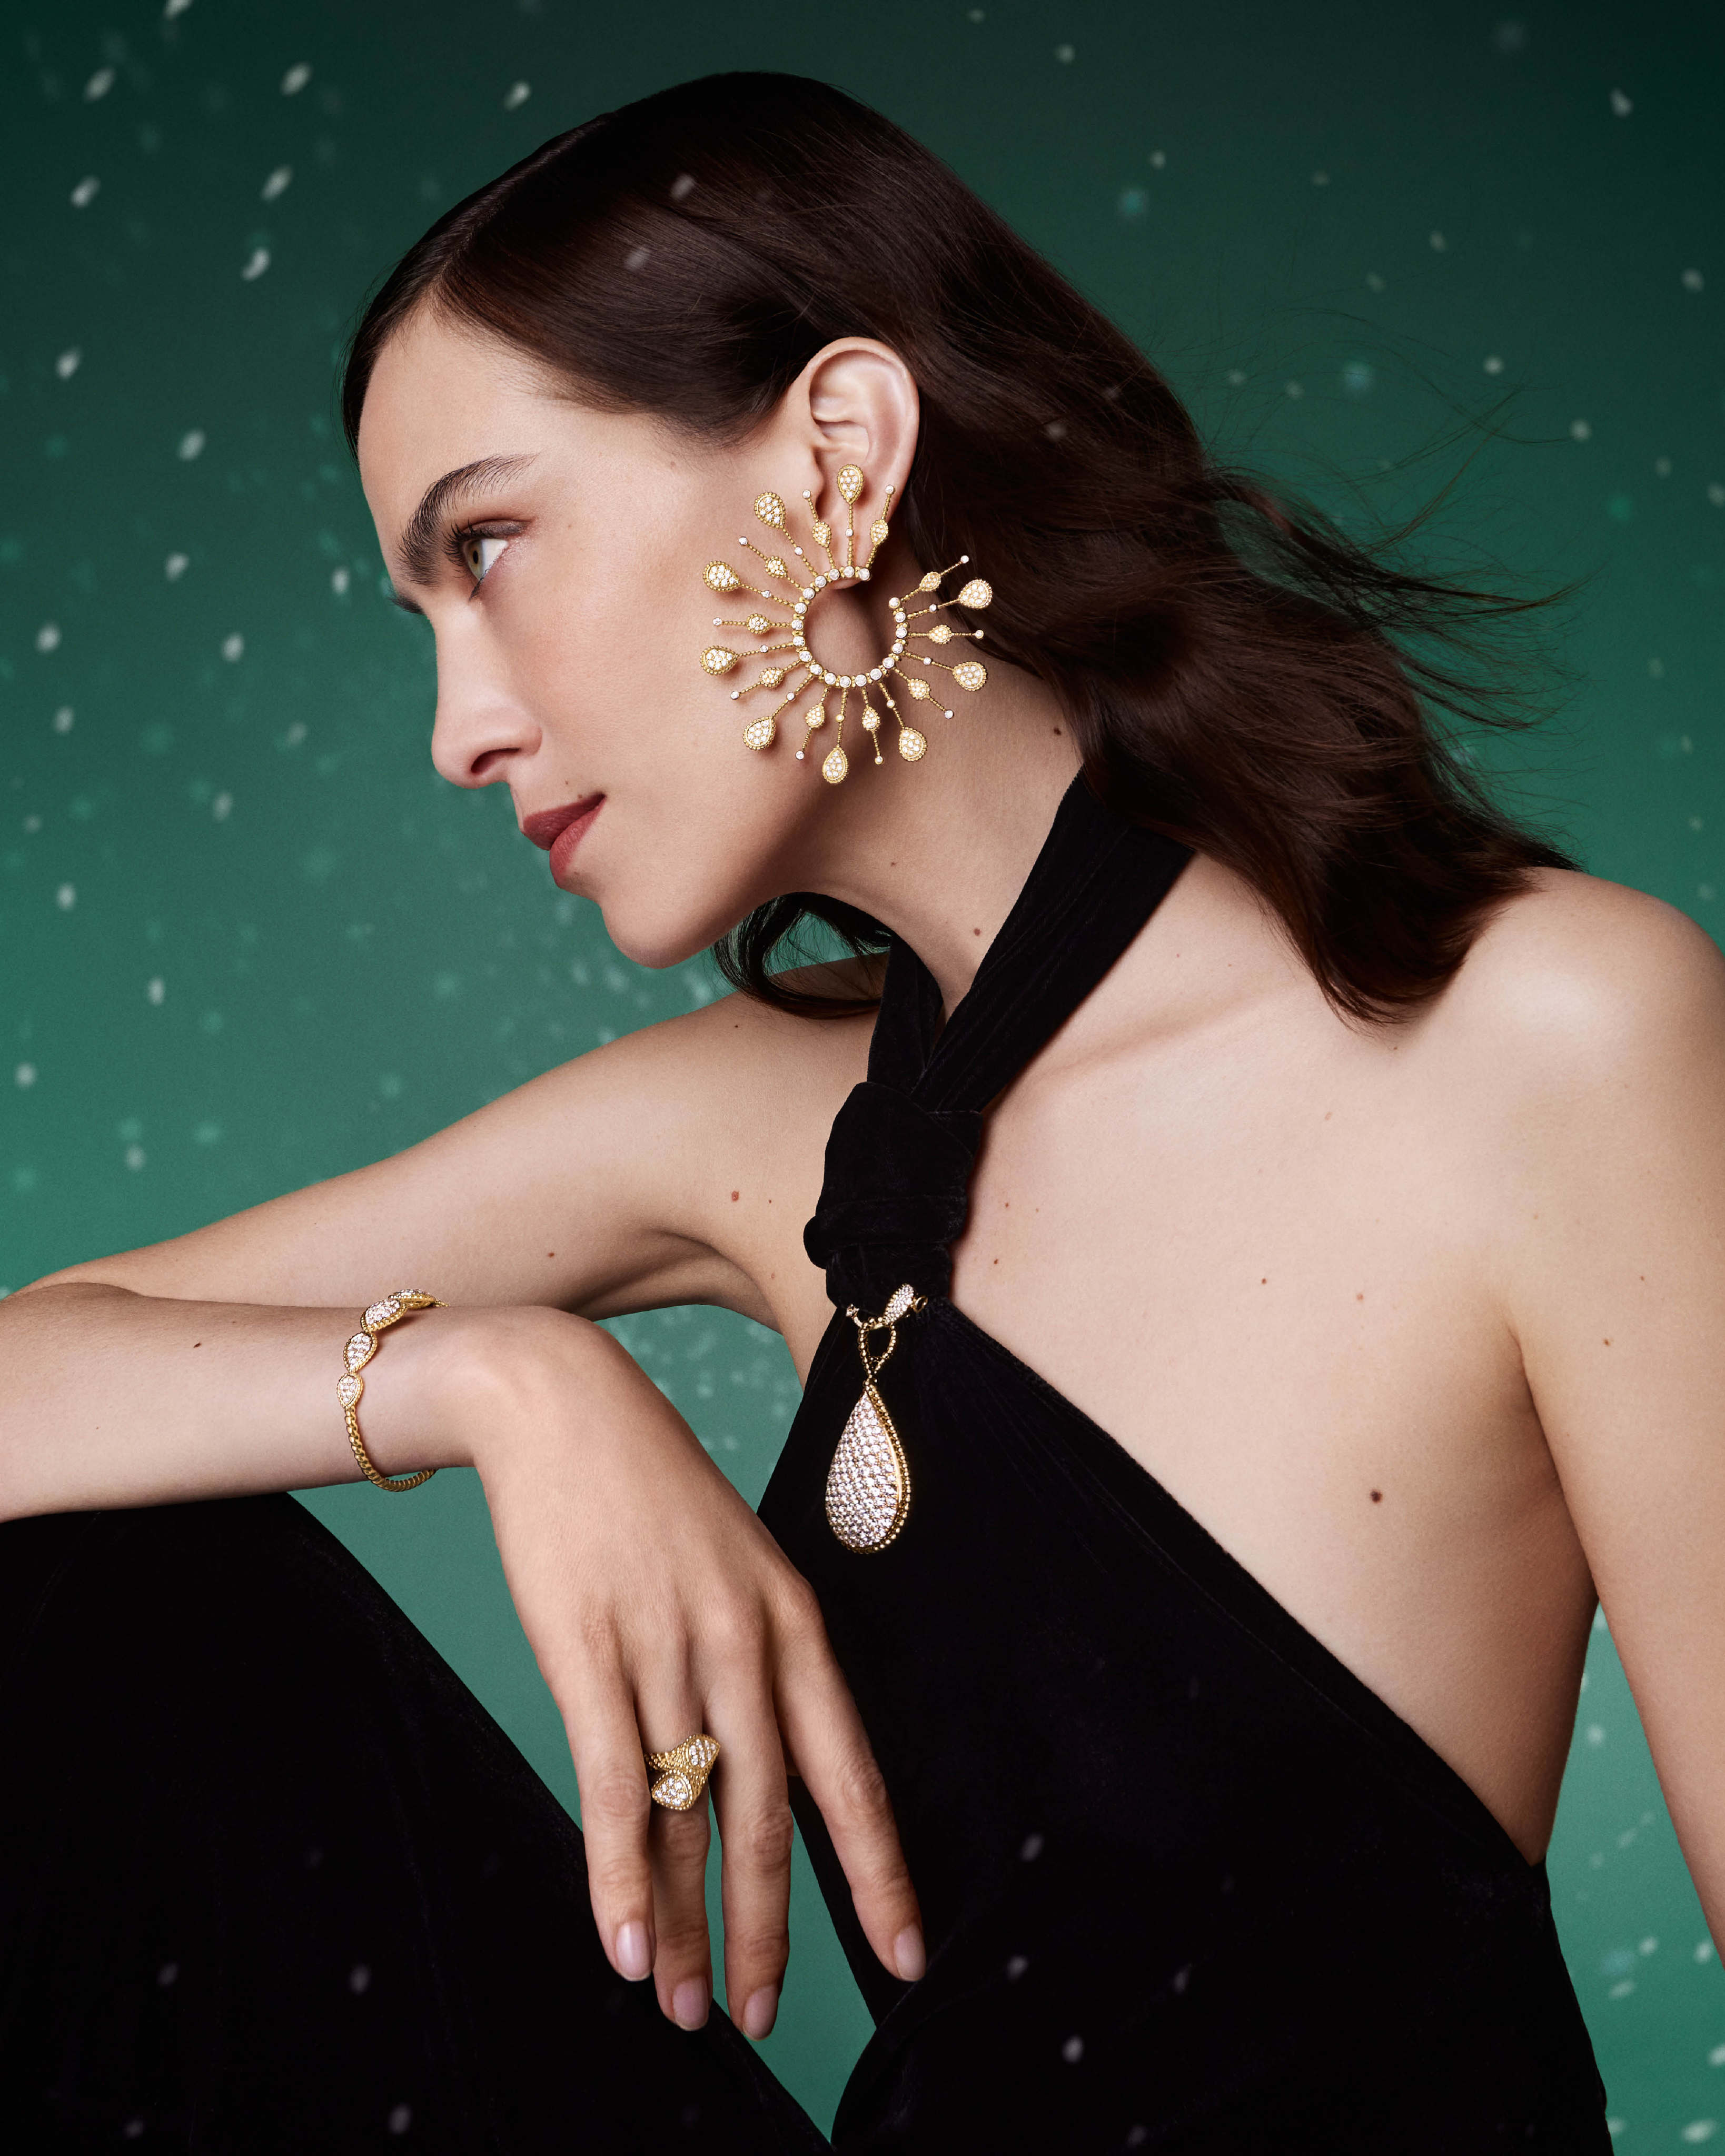 Style holiday gift guide: 6 luxury must-haves for the woman in